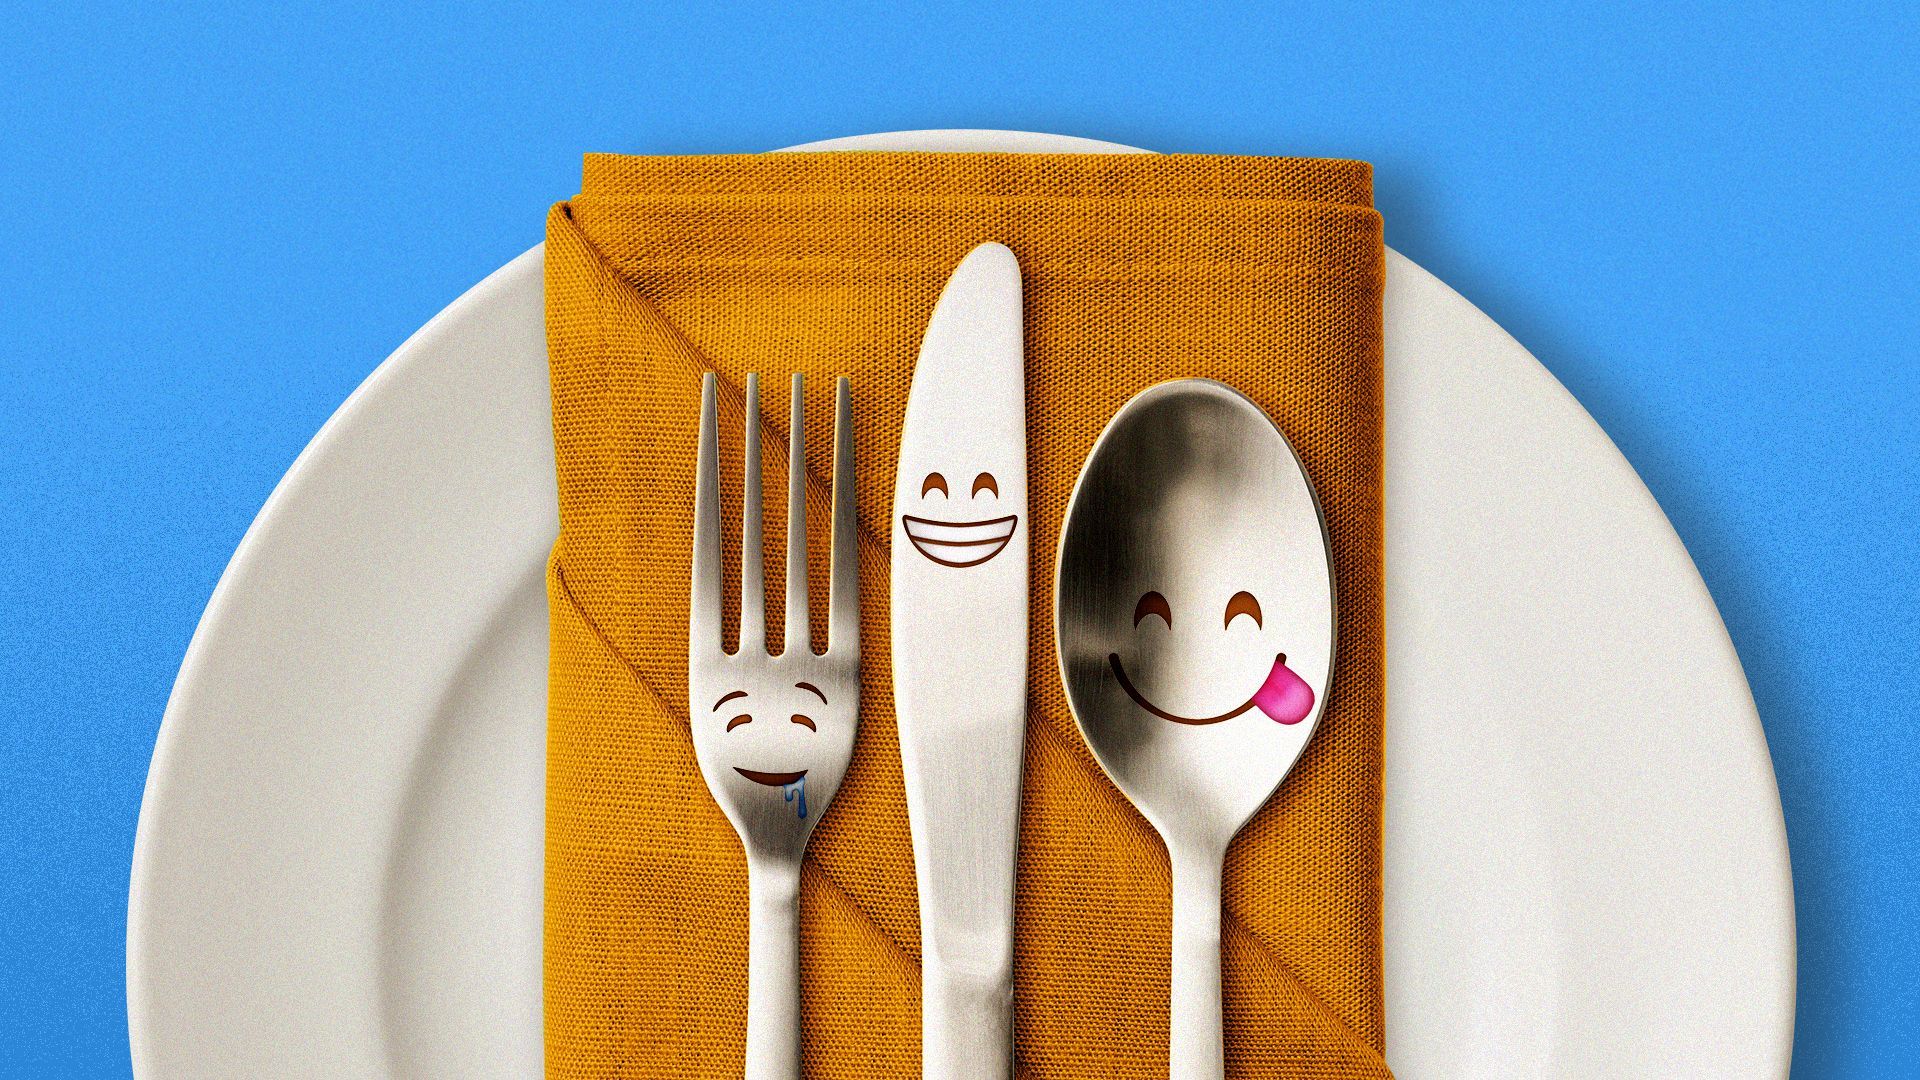 Illustration of utensils with hungry emojis on them.